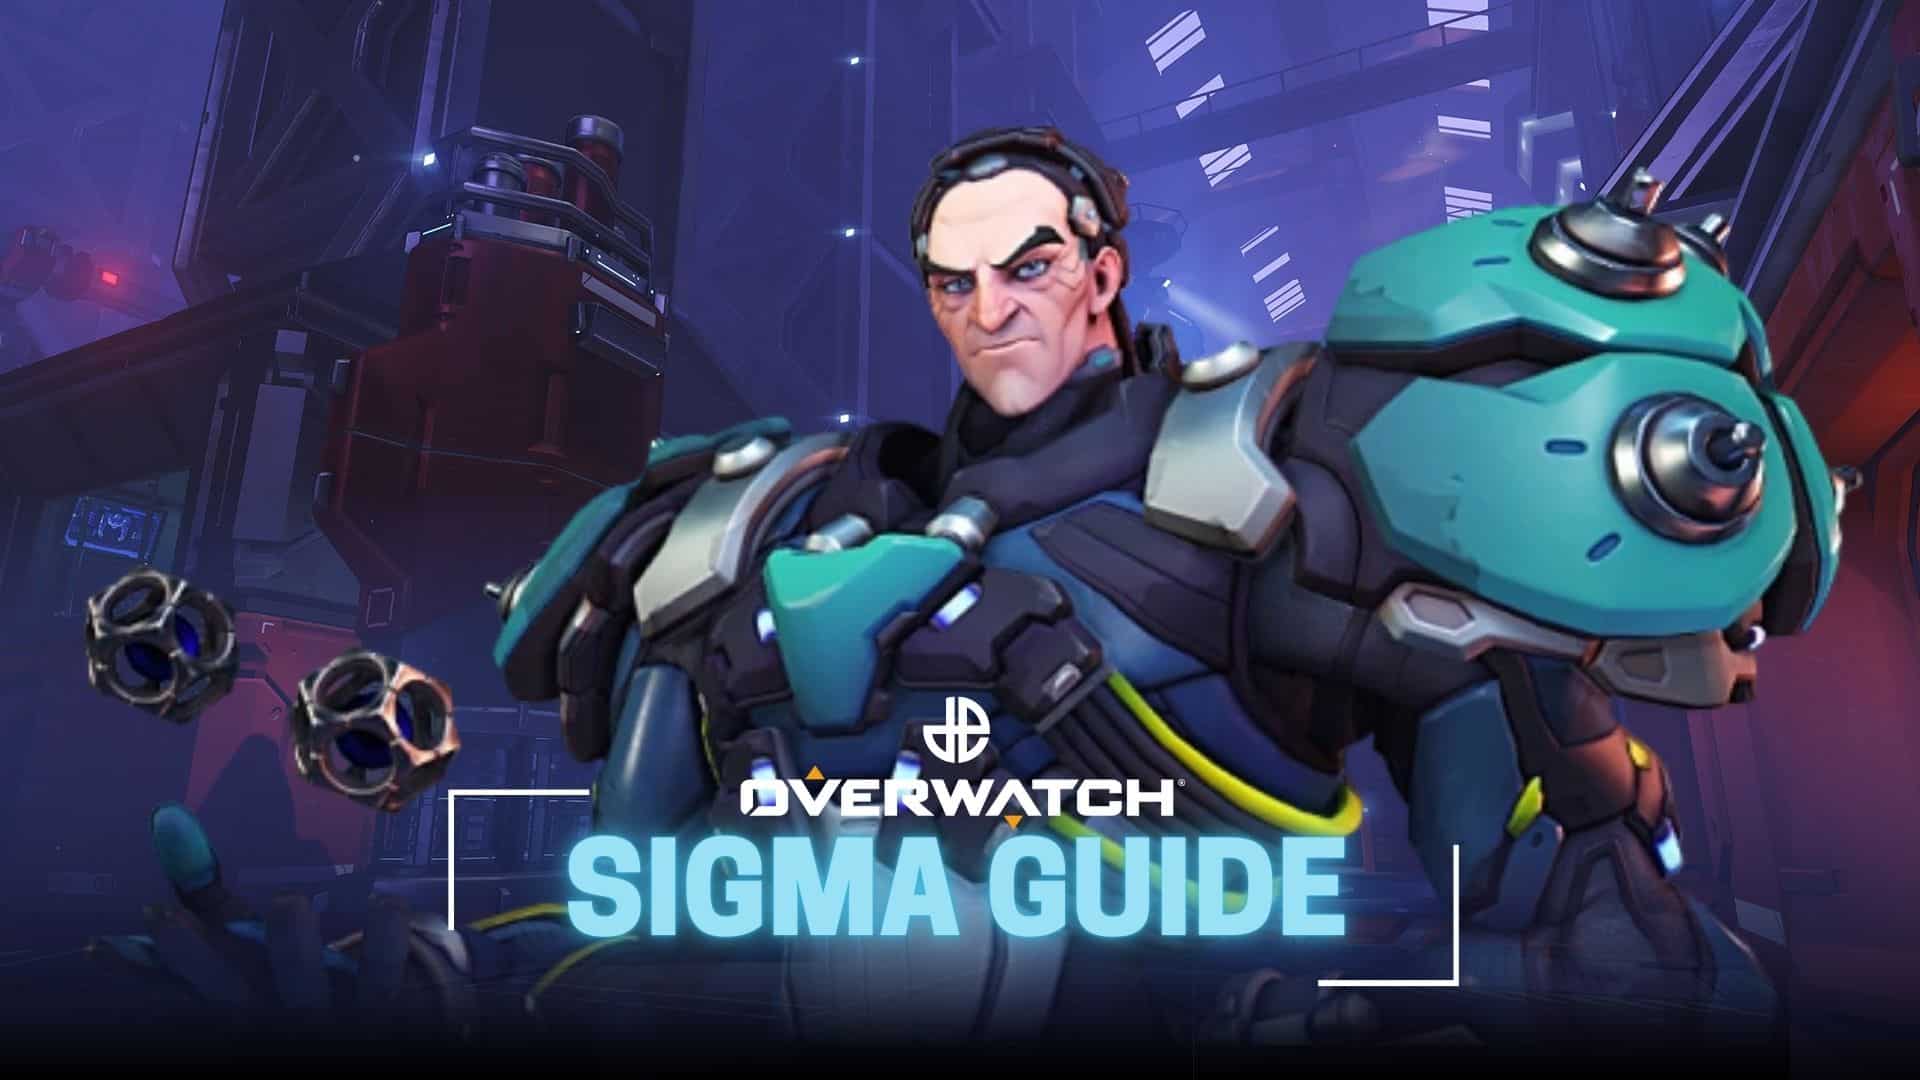 Overwatch's new gravity-controlling tank Sigma is what the game